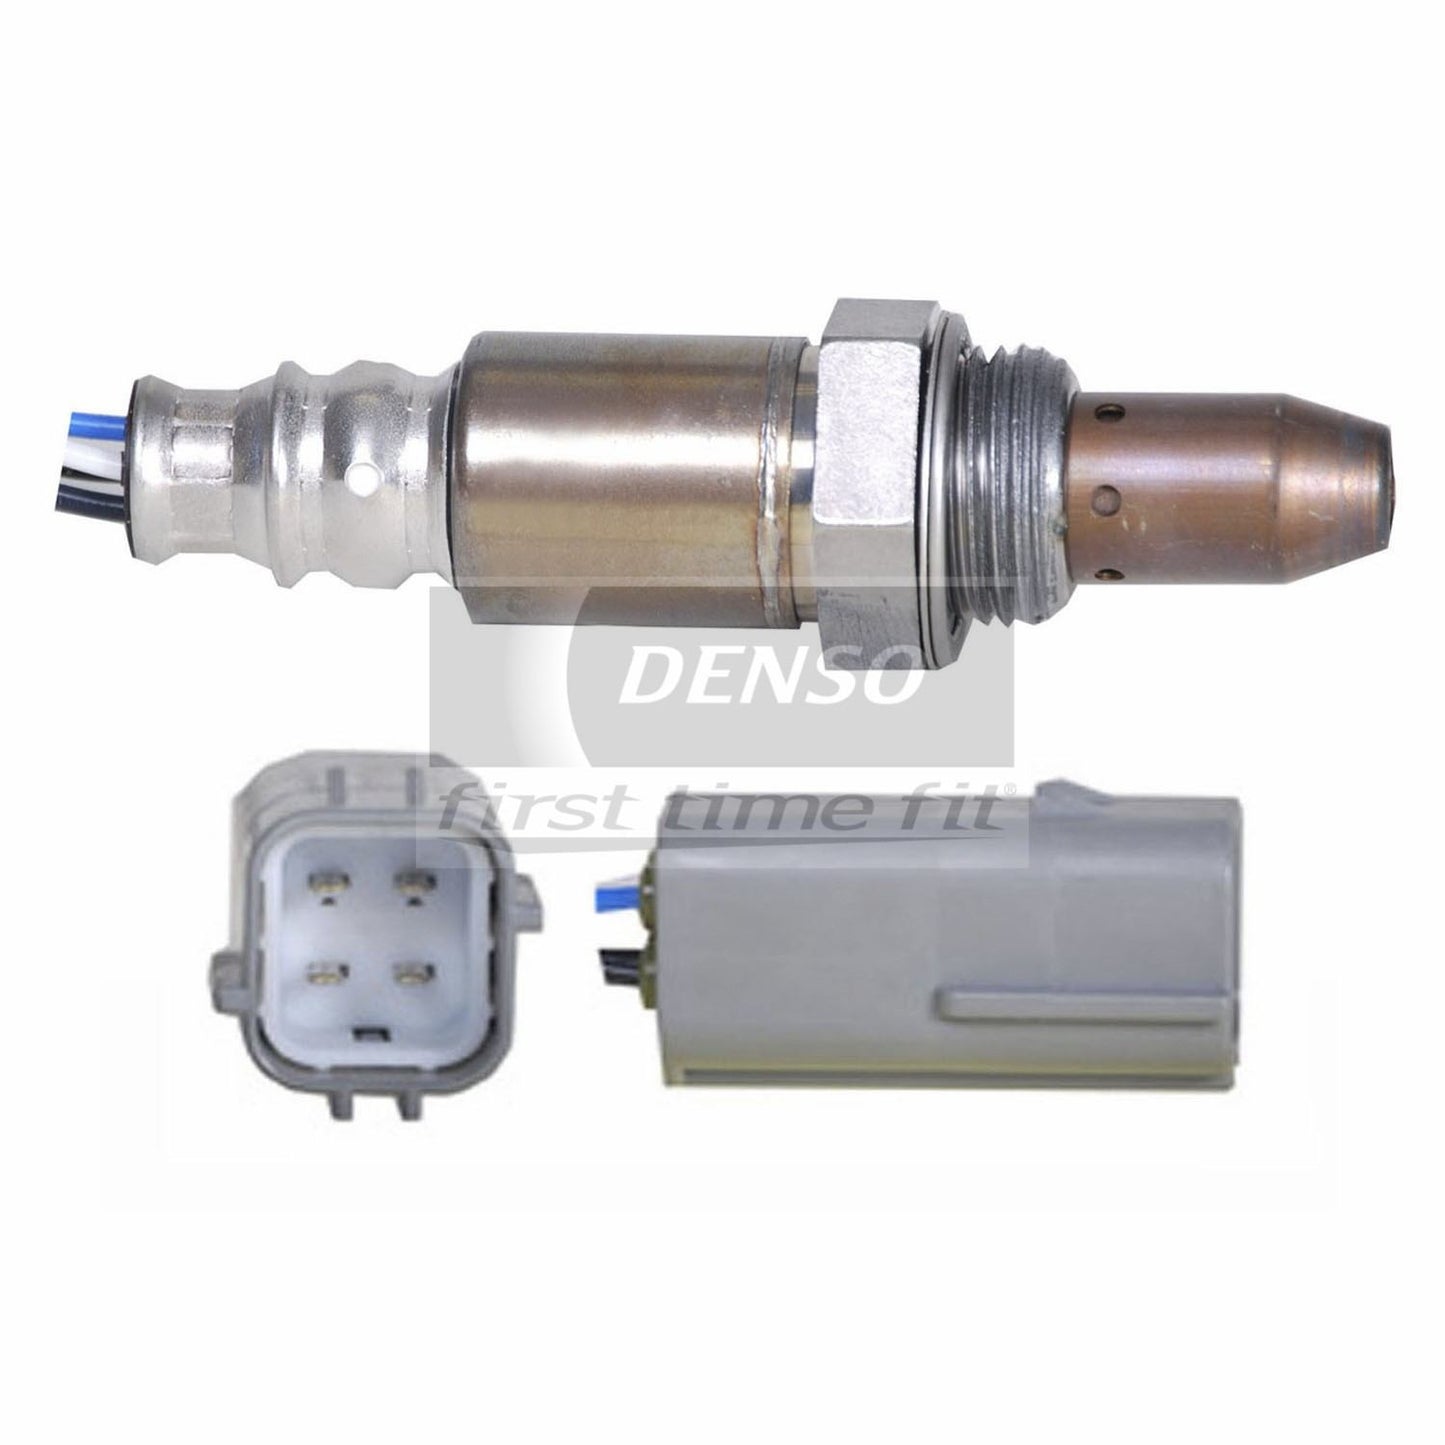 Front View of Front Air / Fuel Ratio Sensor DENSO 234-9036